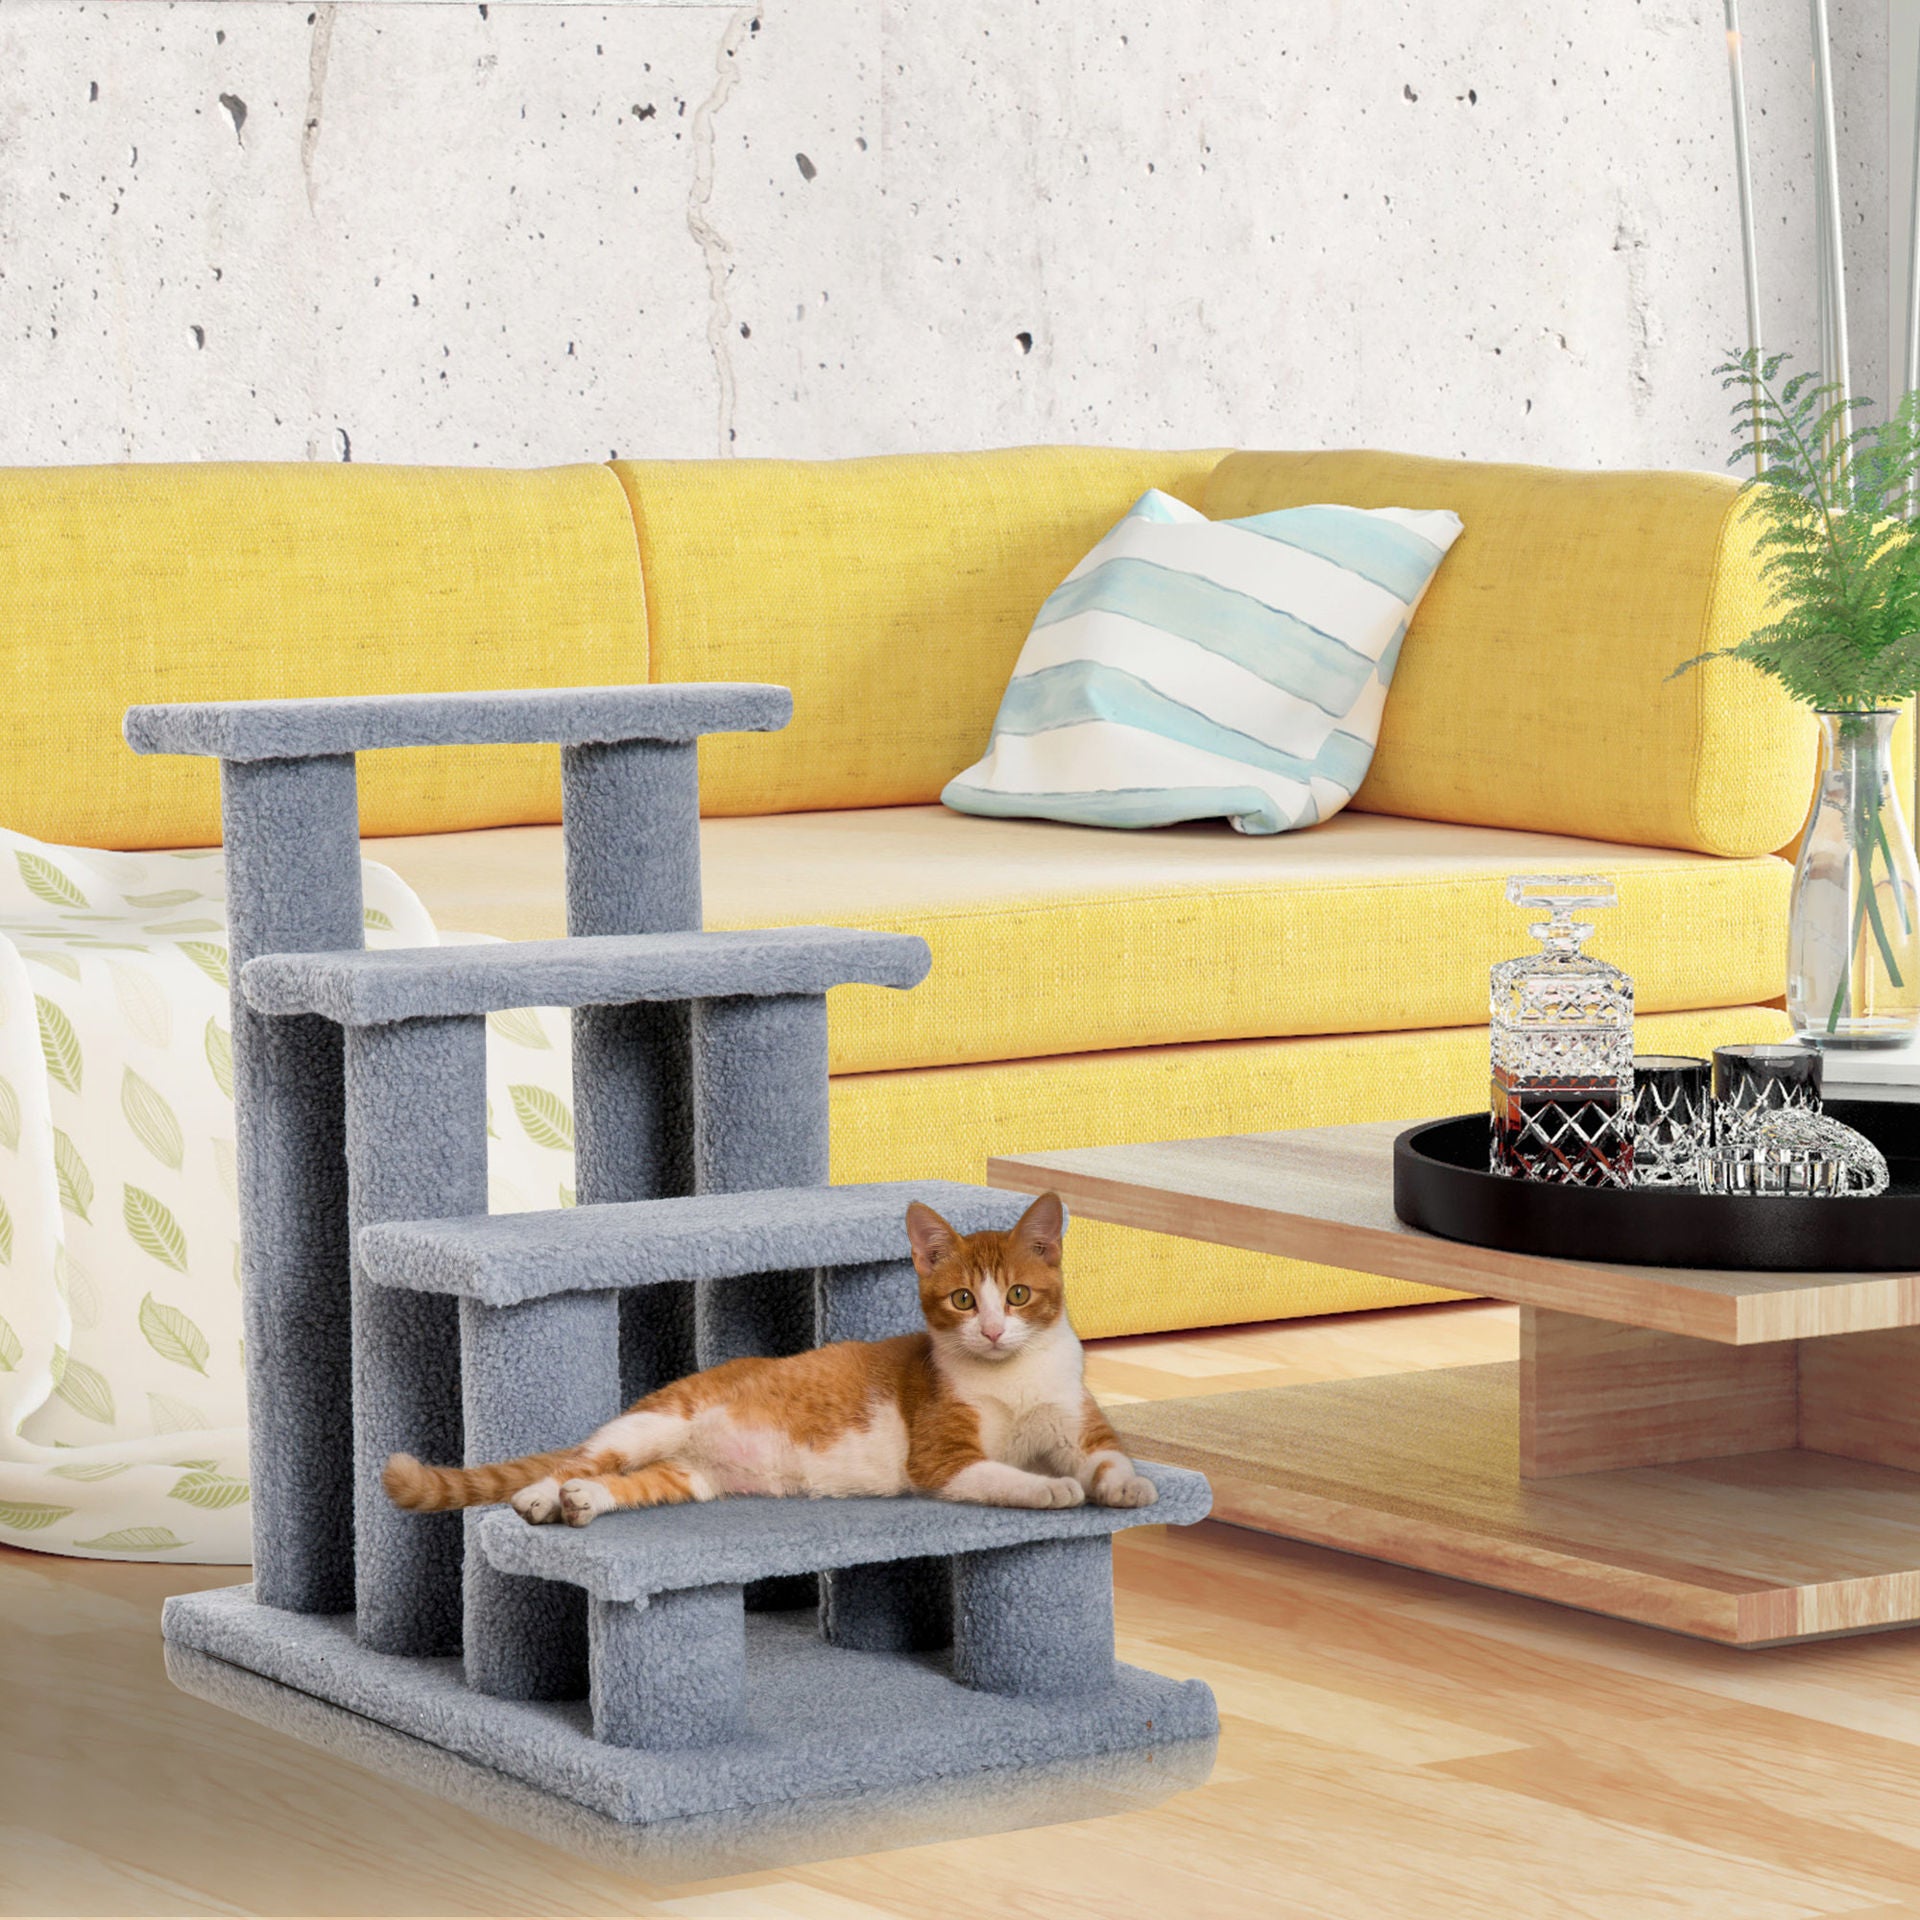 Nancy's Alliance Animal Stairs Cat Stairs Dog Stairs Stairs for cats and dogs 4 steps